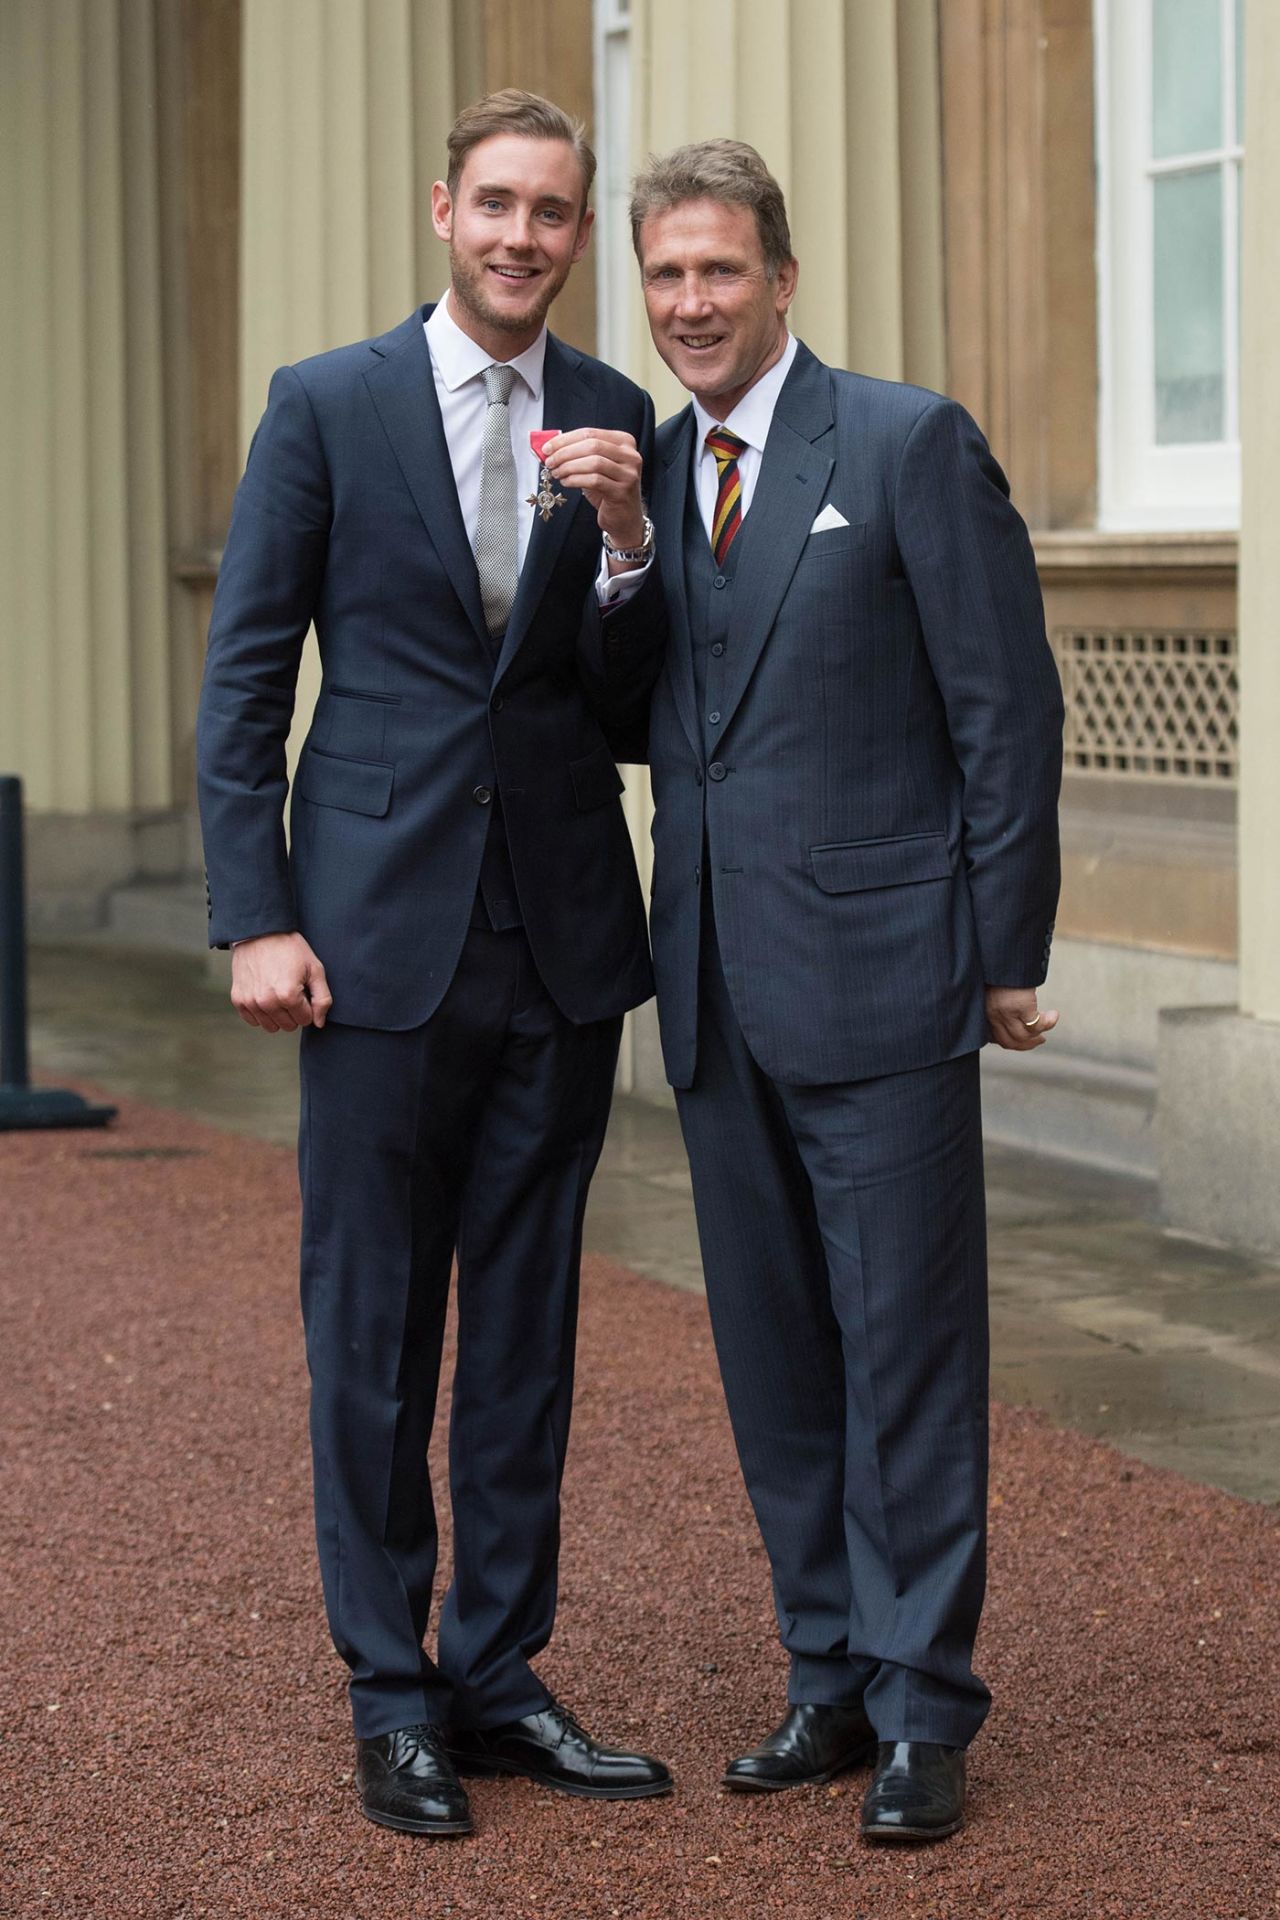 Stuart Broad poses with his MBE alongside his father Chris Broad, Buckingham Palace, February 10, 2017